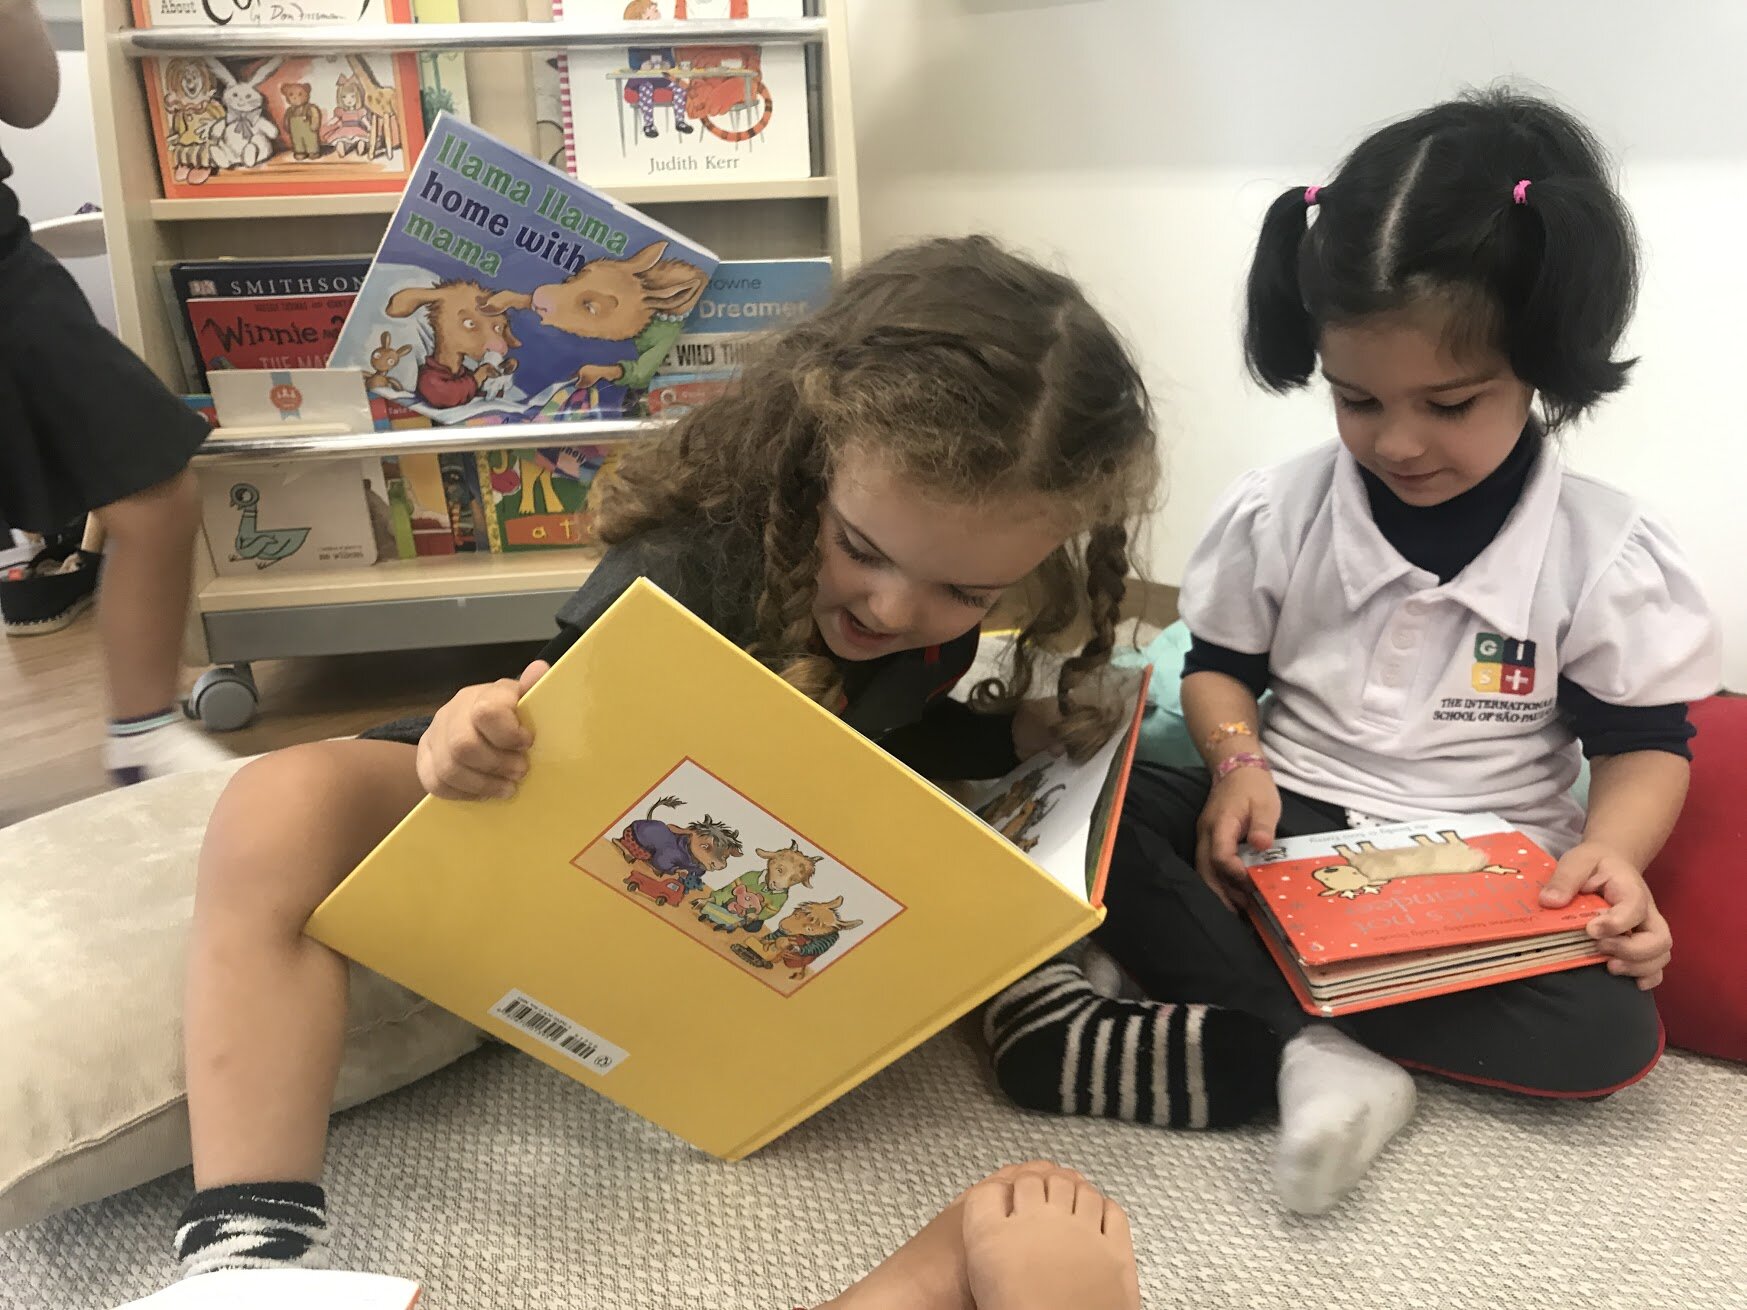 Two pre-school students in bilingual reading activity. Behind them is a shelf with other options of books in English.